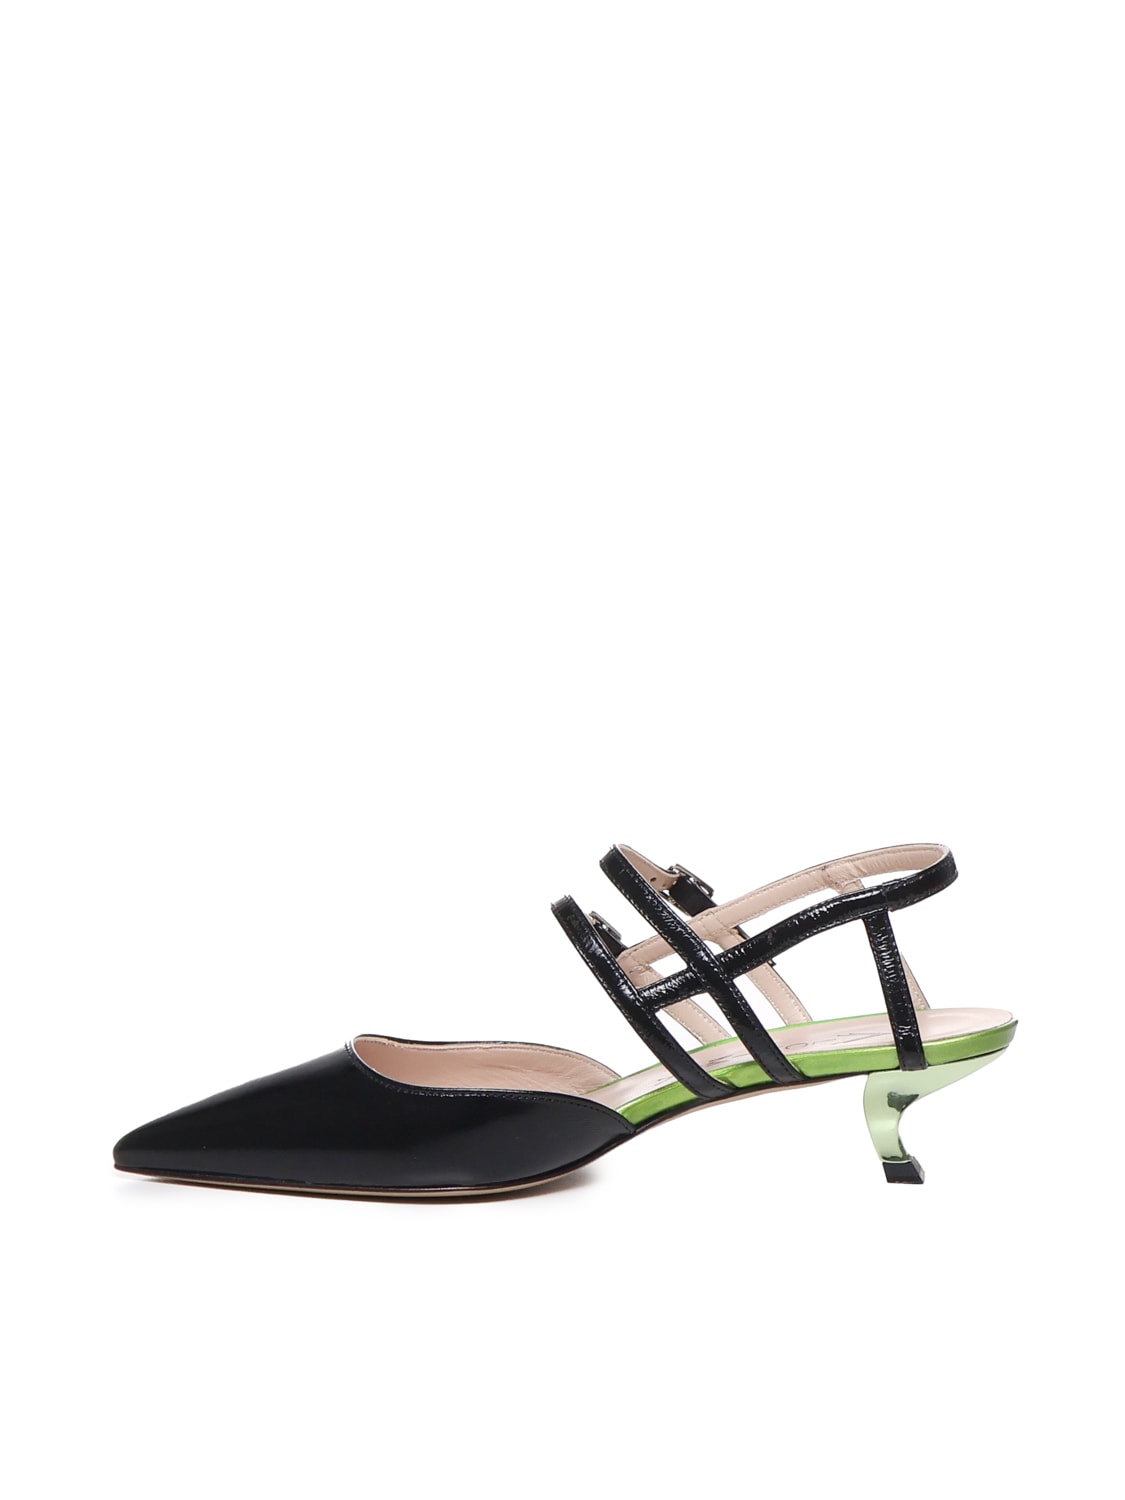 Shop Alchimia Shoes With Toes And Straps In Black, Green